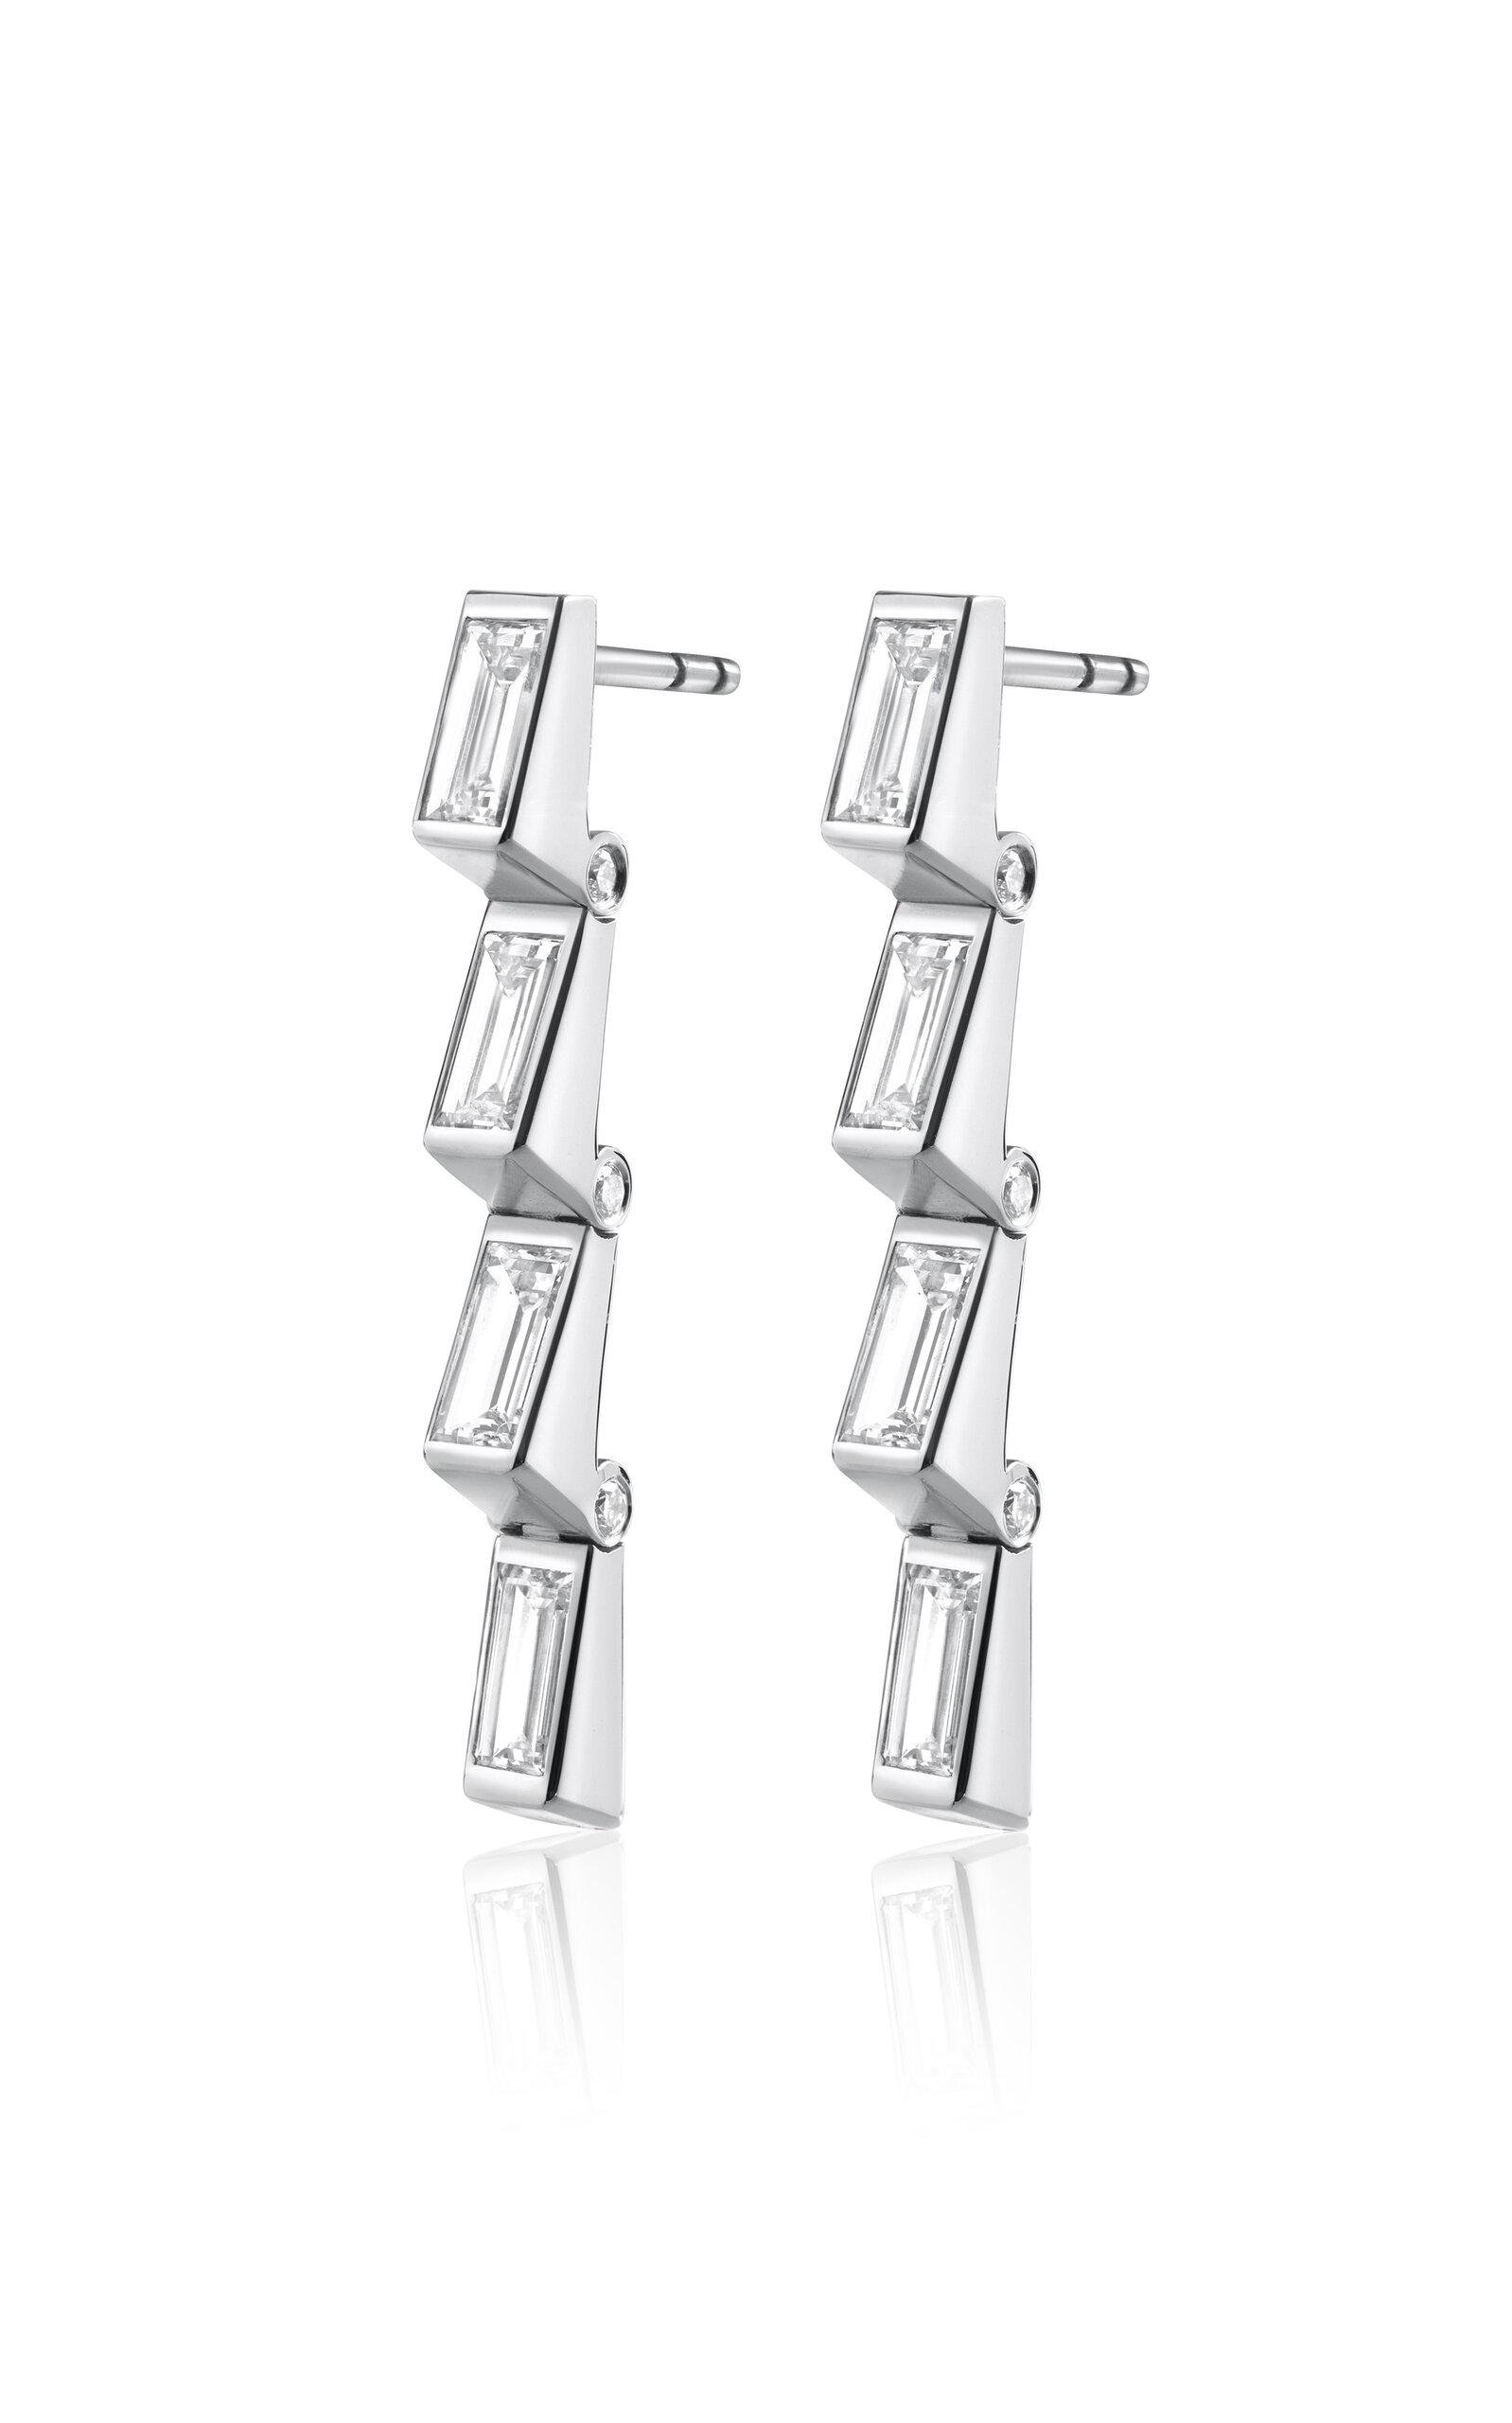 Erede - 18k White Gold Hinged Four Drop Earrings - White - OS - Only At Moda Operandi - Gifts For Her by EREDE